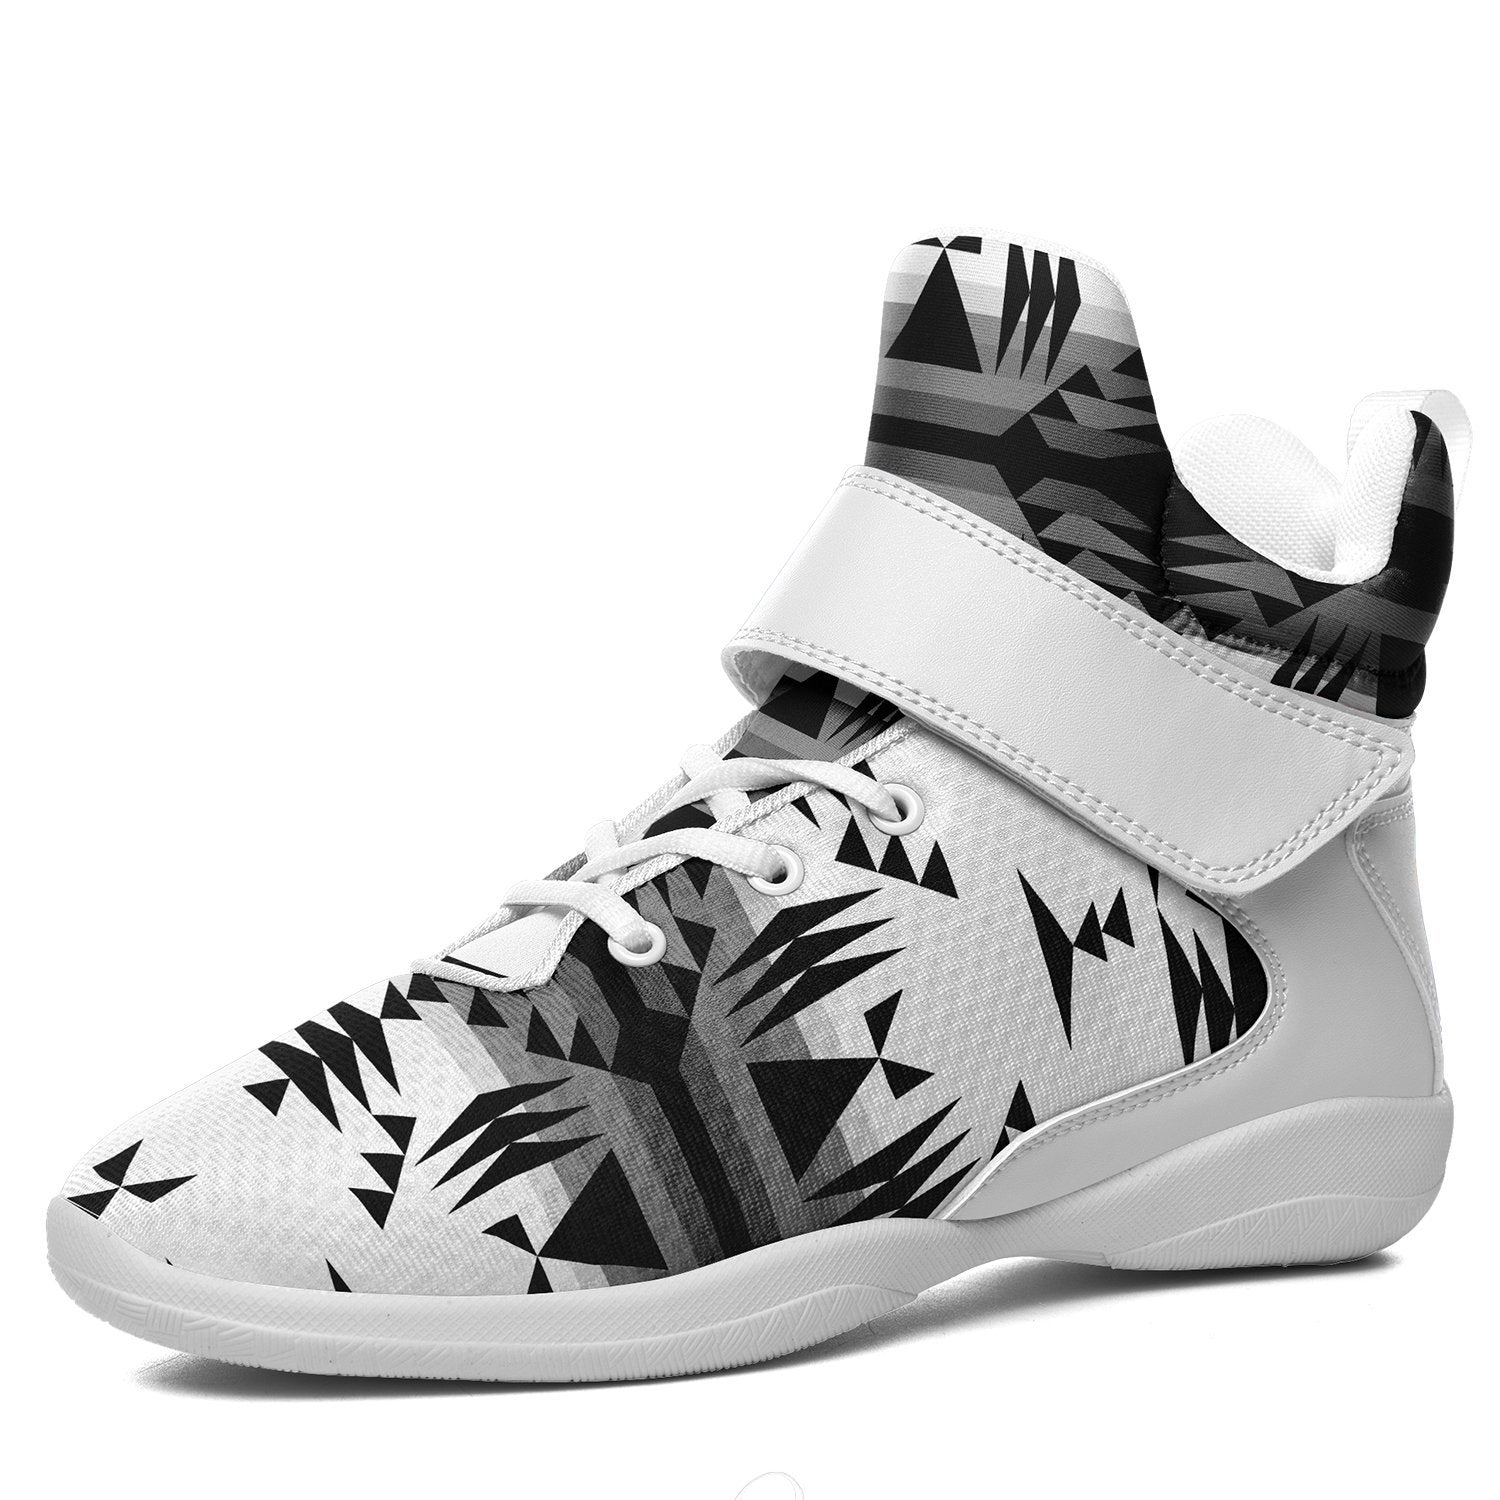 Between the Mountains White and Black Ipottaa Basketball / Sport High Top Shoes - White Sole 49 Dzine US Men 7 / EUR 40 White Sole with White Strap 